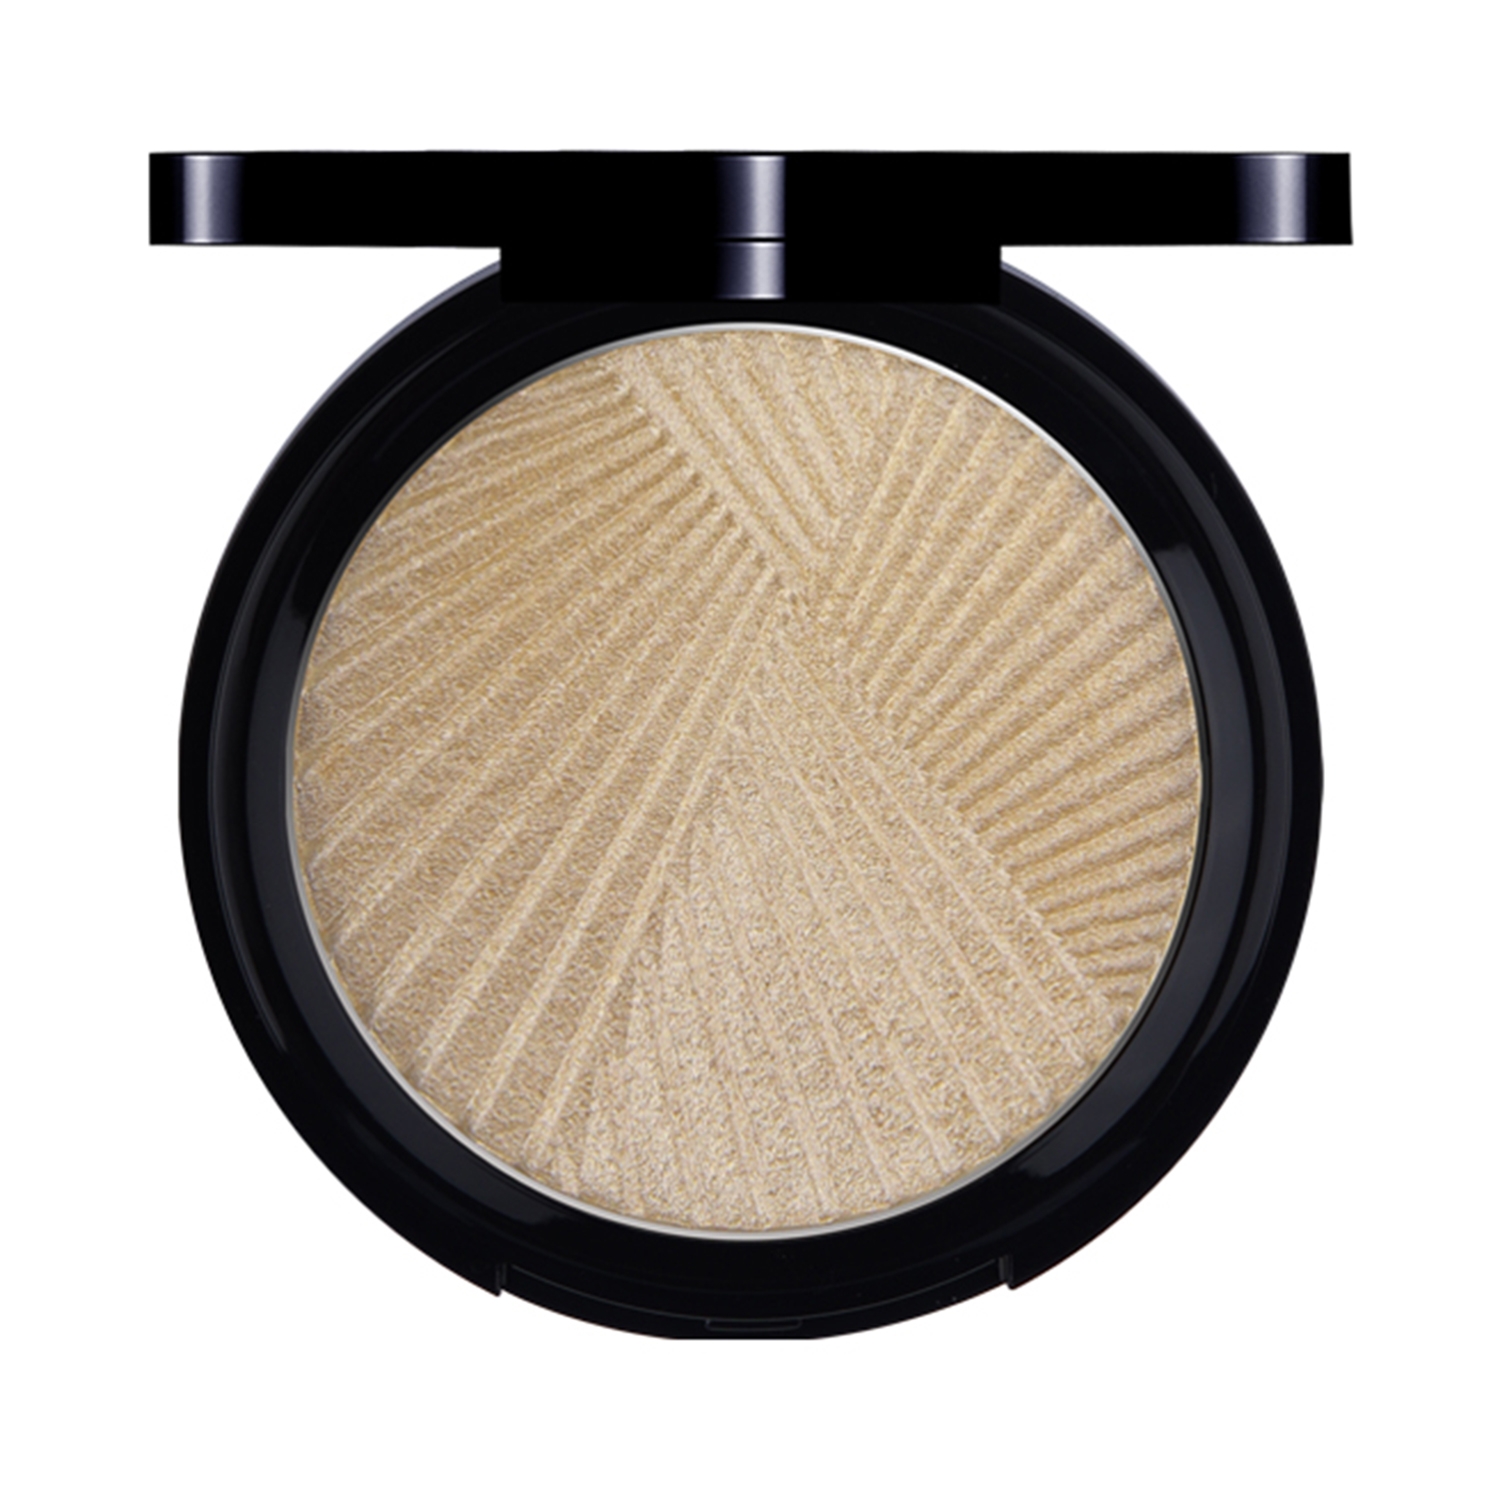 Daily Life Forever52 | Daily Life Forever52 Sunkissed Illuminator/ Highlighter ILU002 (9gm)